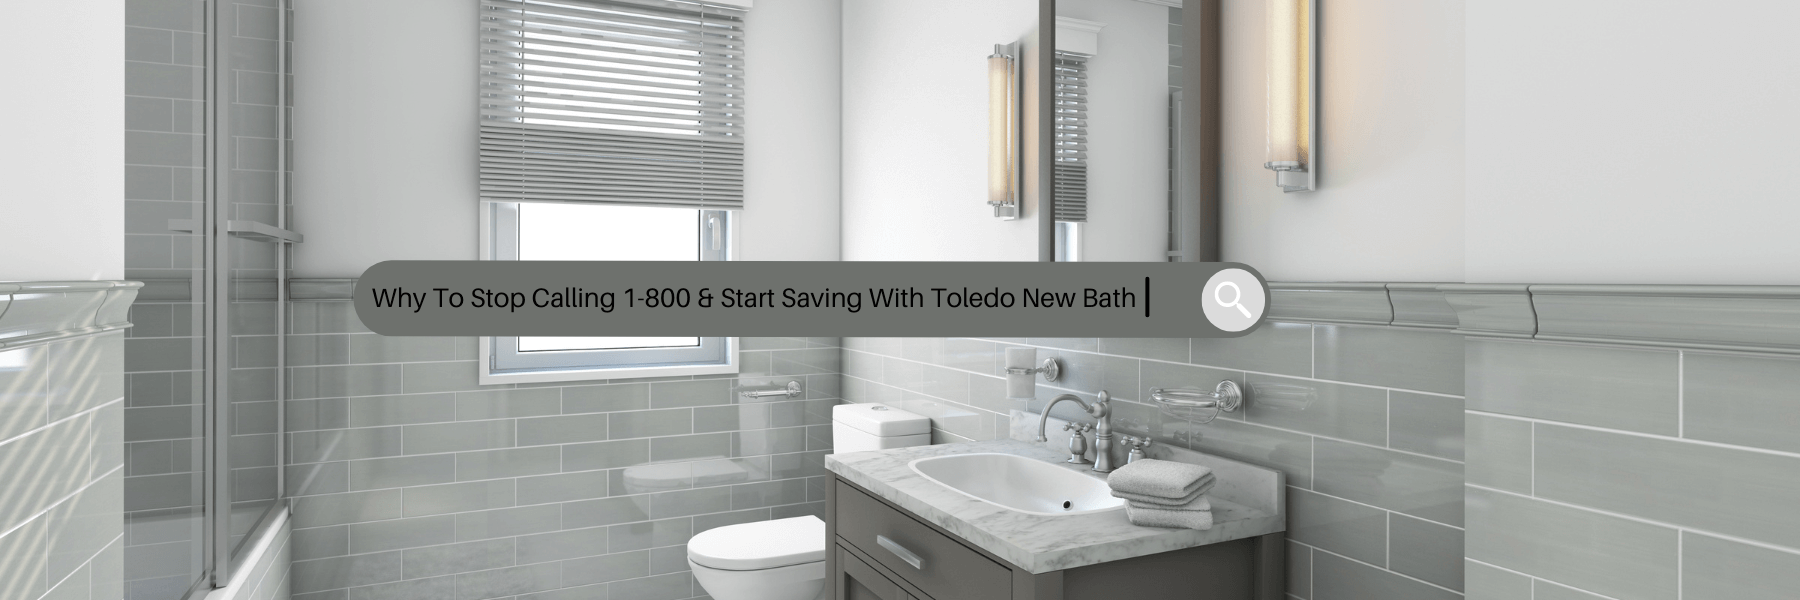 Bathroom Header With Search Bar (1).png